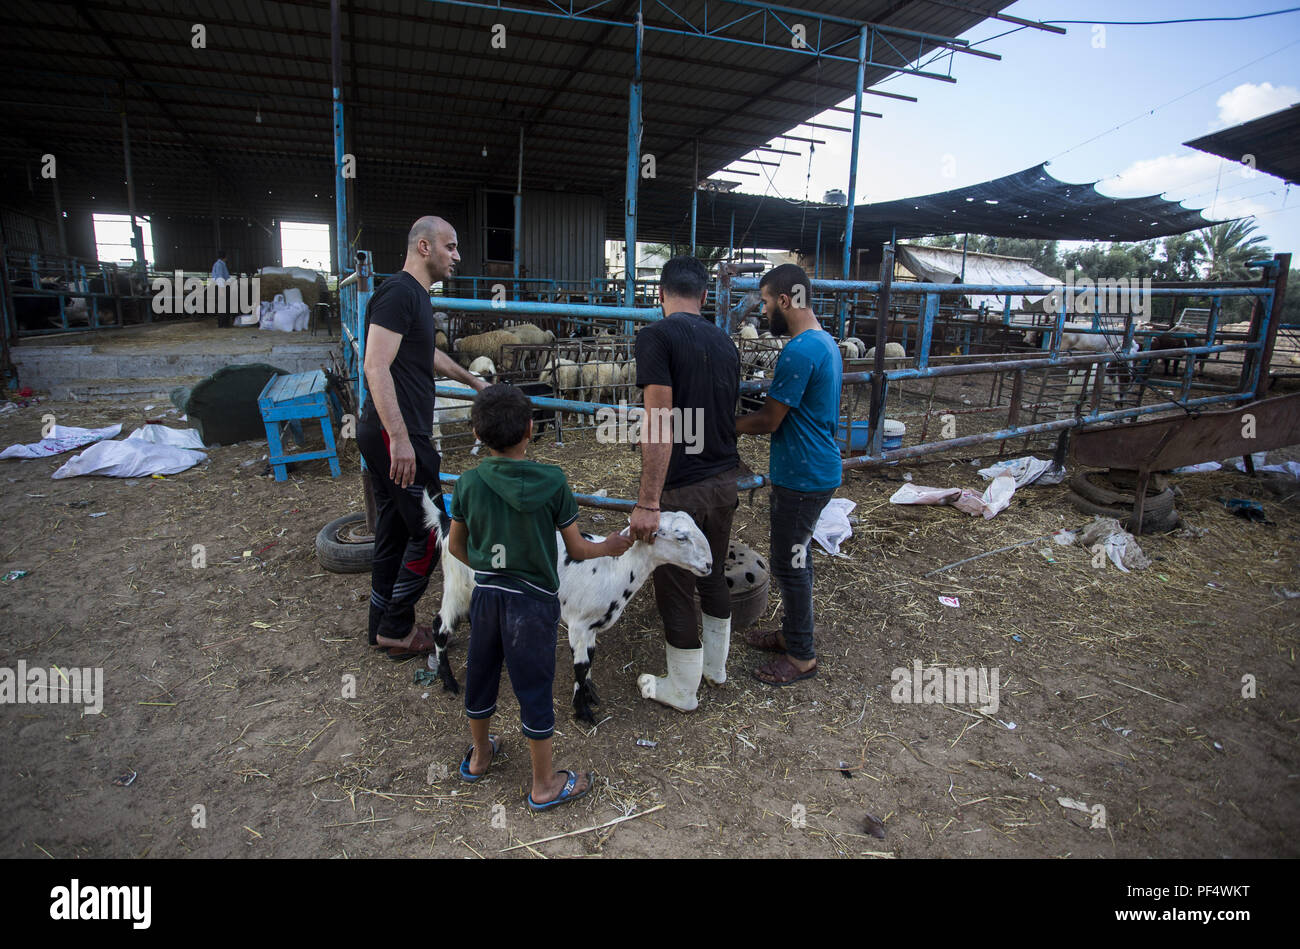 Gaza City, The Gaza Strip, Gaza. 18th Aug, 2018. A family seen choosing cattles at the cattle shop. Palestinians gather in a cattle shop to purchase cattles to be sacrificed. before Eid al-Adha in the east of Jabalya refugee camp. Eid al-Adha (Festival of Sacrifice) is celebrated throughout the Islamic world as the commemoration of Abraham's will to sacrifice his son for God, cows, camels, goats and sheep are traditionally slaughtered on the Holy Day. Credit: Mahmoud Issa/SOPA Images/ZUMA Wire/Alamy Live News Stock Photo